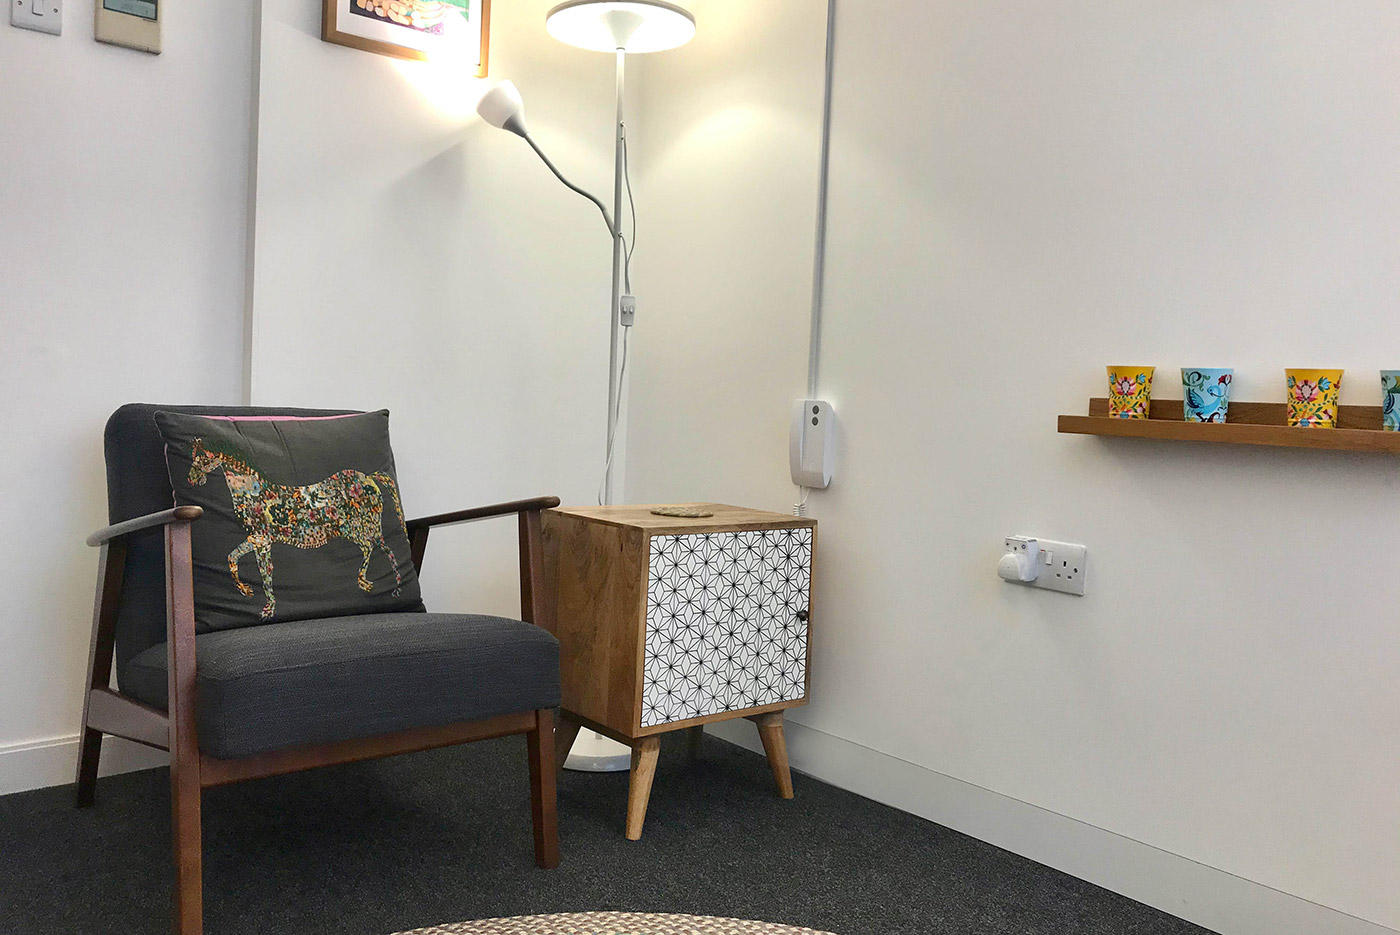 King's Cross Road Room 302: arm chairs, lamp, picture on wall